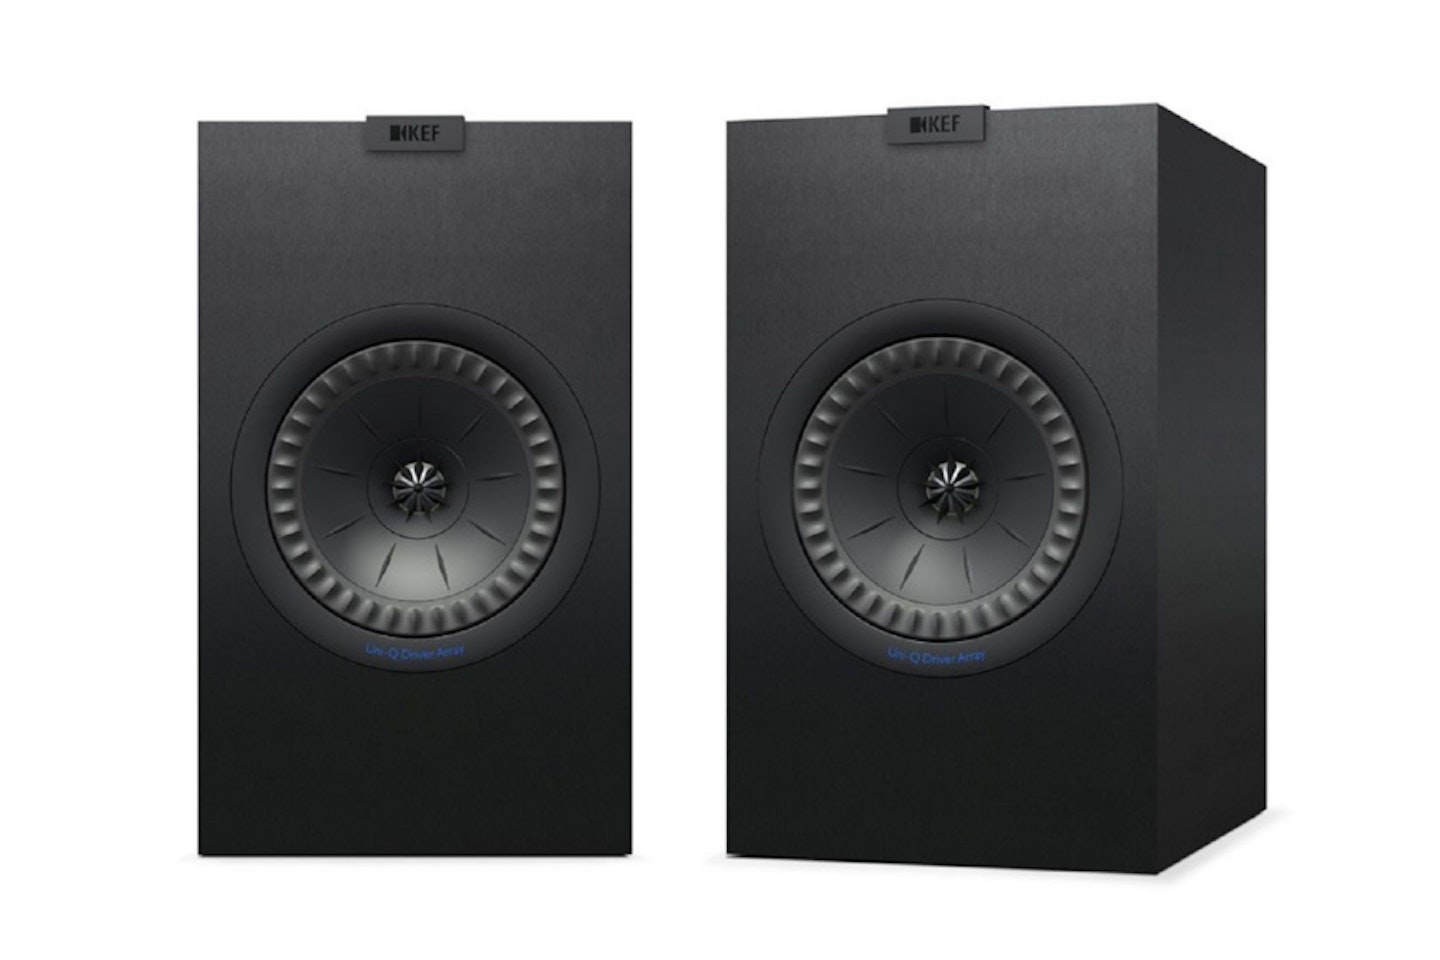 KEF Q350 (Black) - one of the best speakers for music